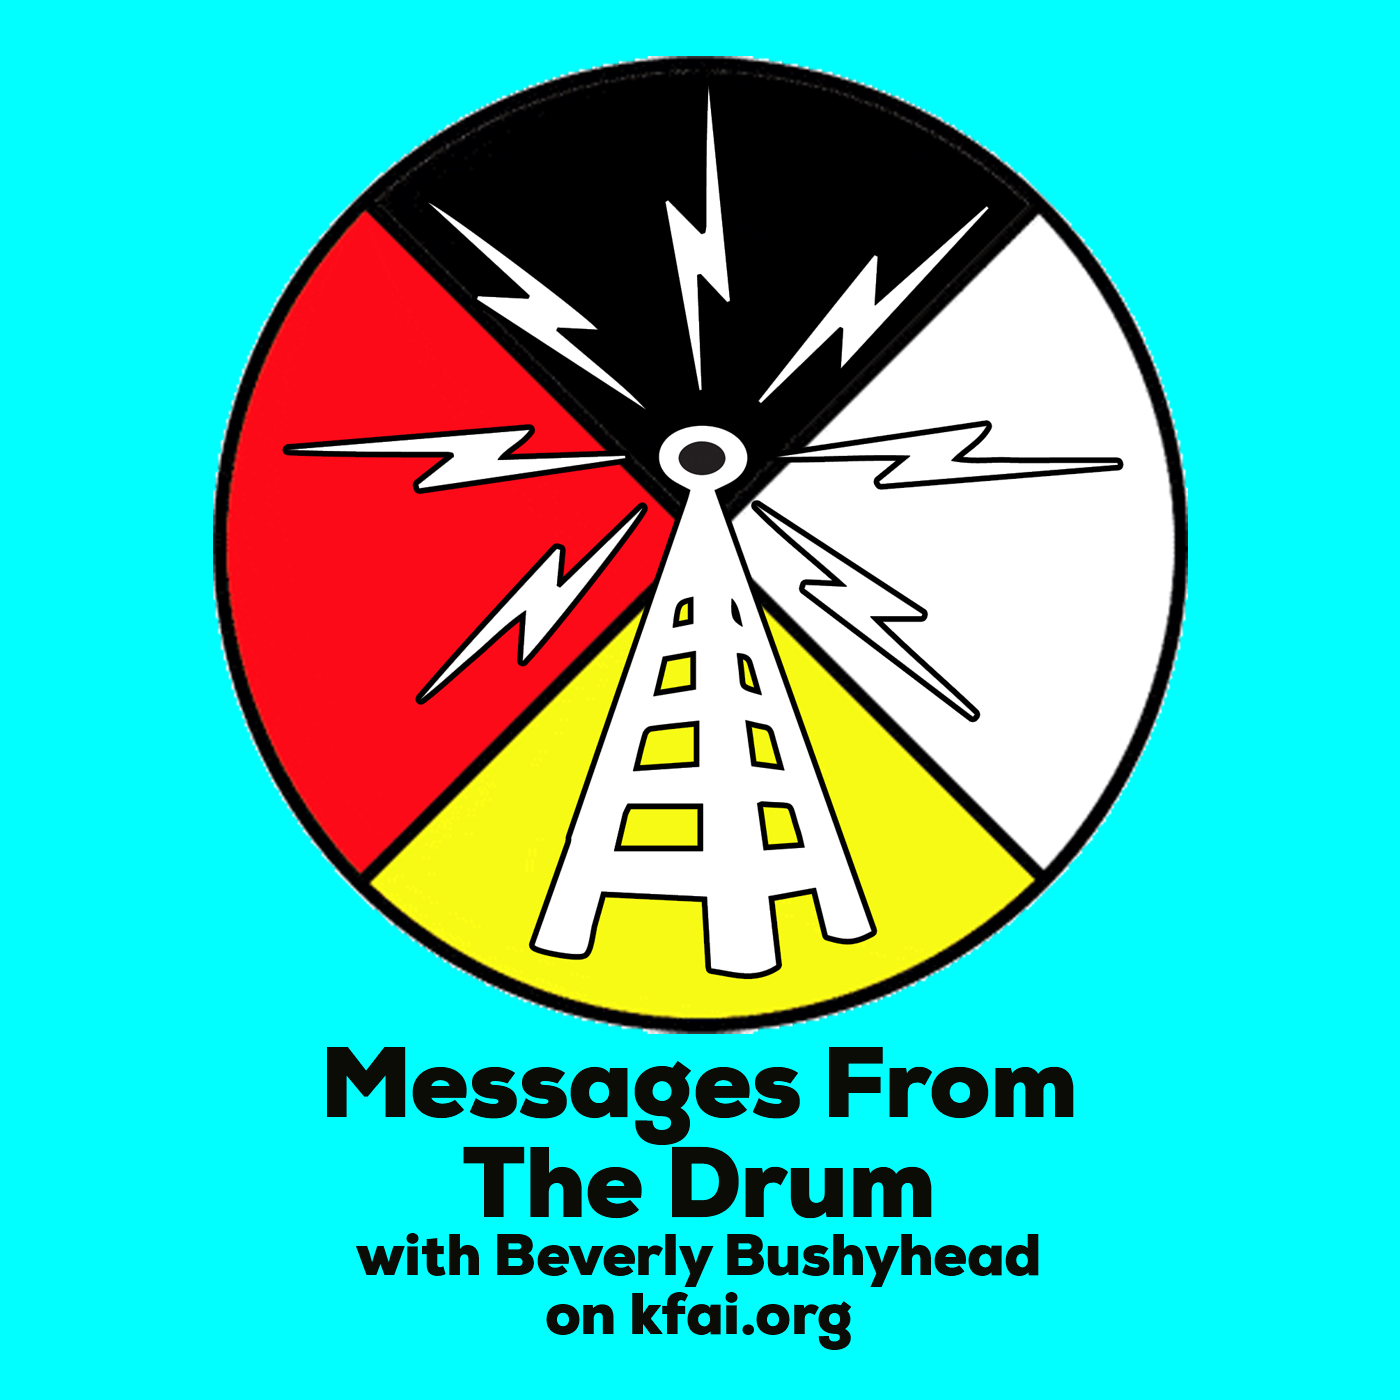 Messages From The Drum